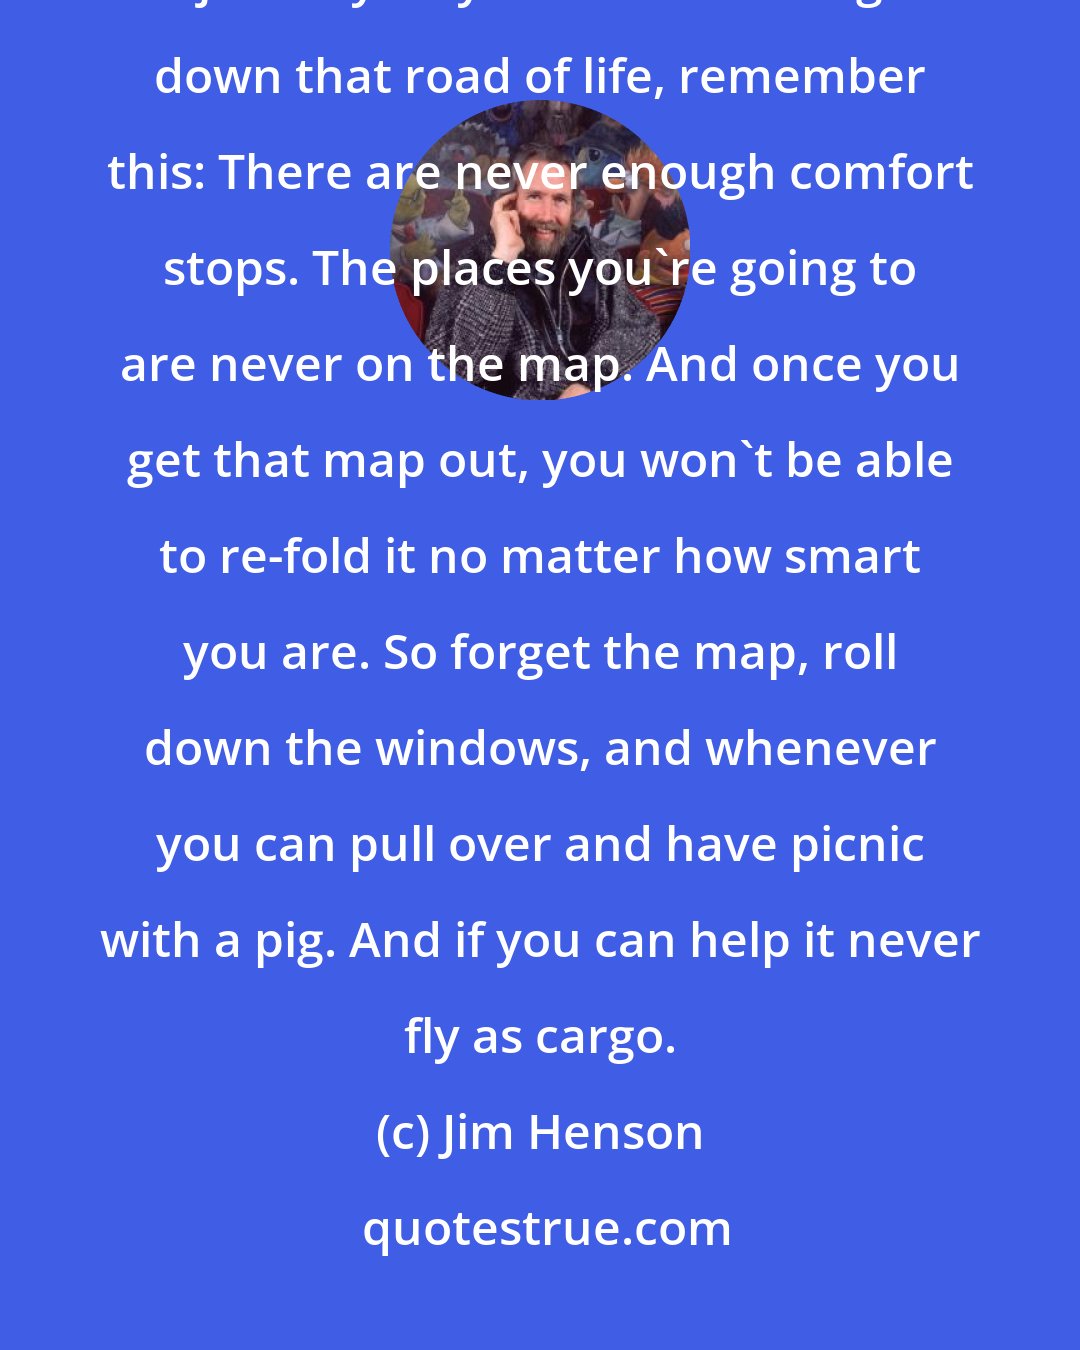 Jim Henson: I really do believe that all of you are at the beginning of a wonderful journey.As you start traveling down that road of life, remember this: There are never enough comfort stops. The places you're going to are never on the map. And once you get that map out, you won't be able to re-fold it no matter how smart you are. So forget the map, roll down the windows, and whenever you can pull over and have picnic with a pig. And if you can help it never fly as cargo.